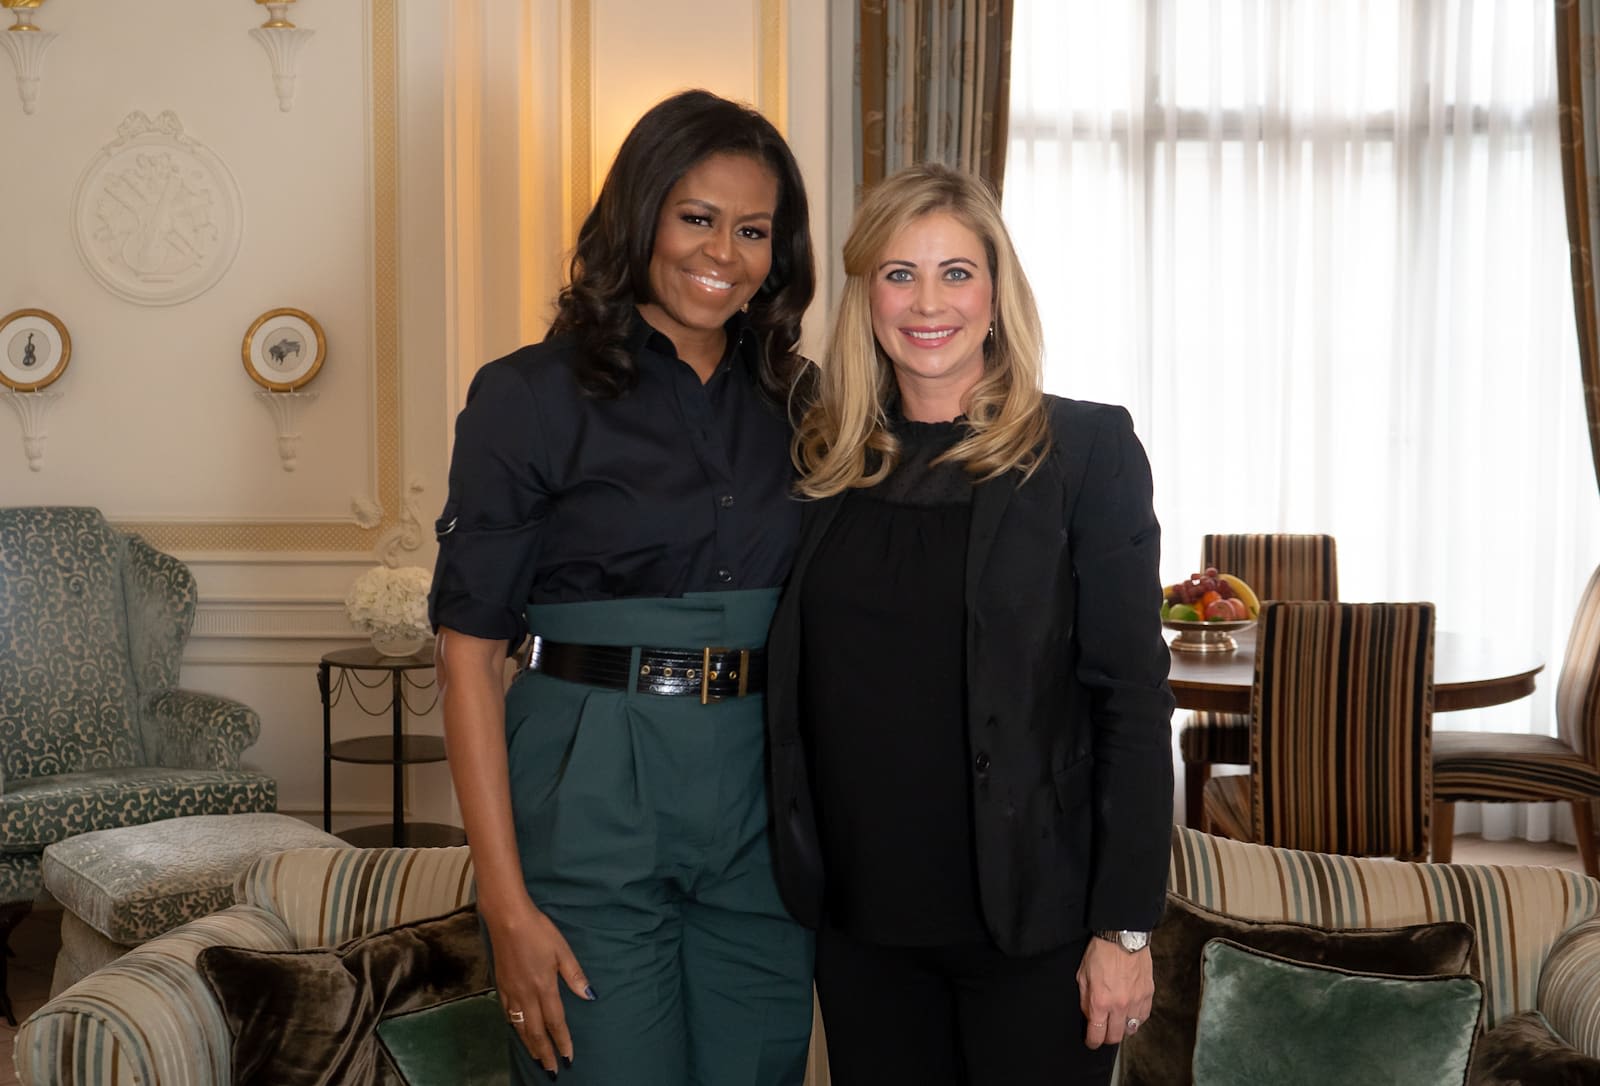 Holly Branson standing next to Michelle Obama, both facing the camera and smiling